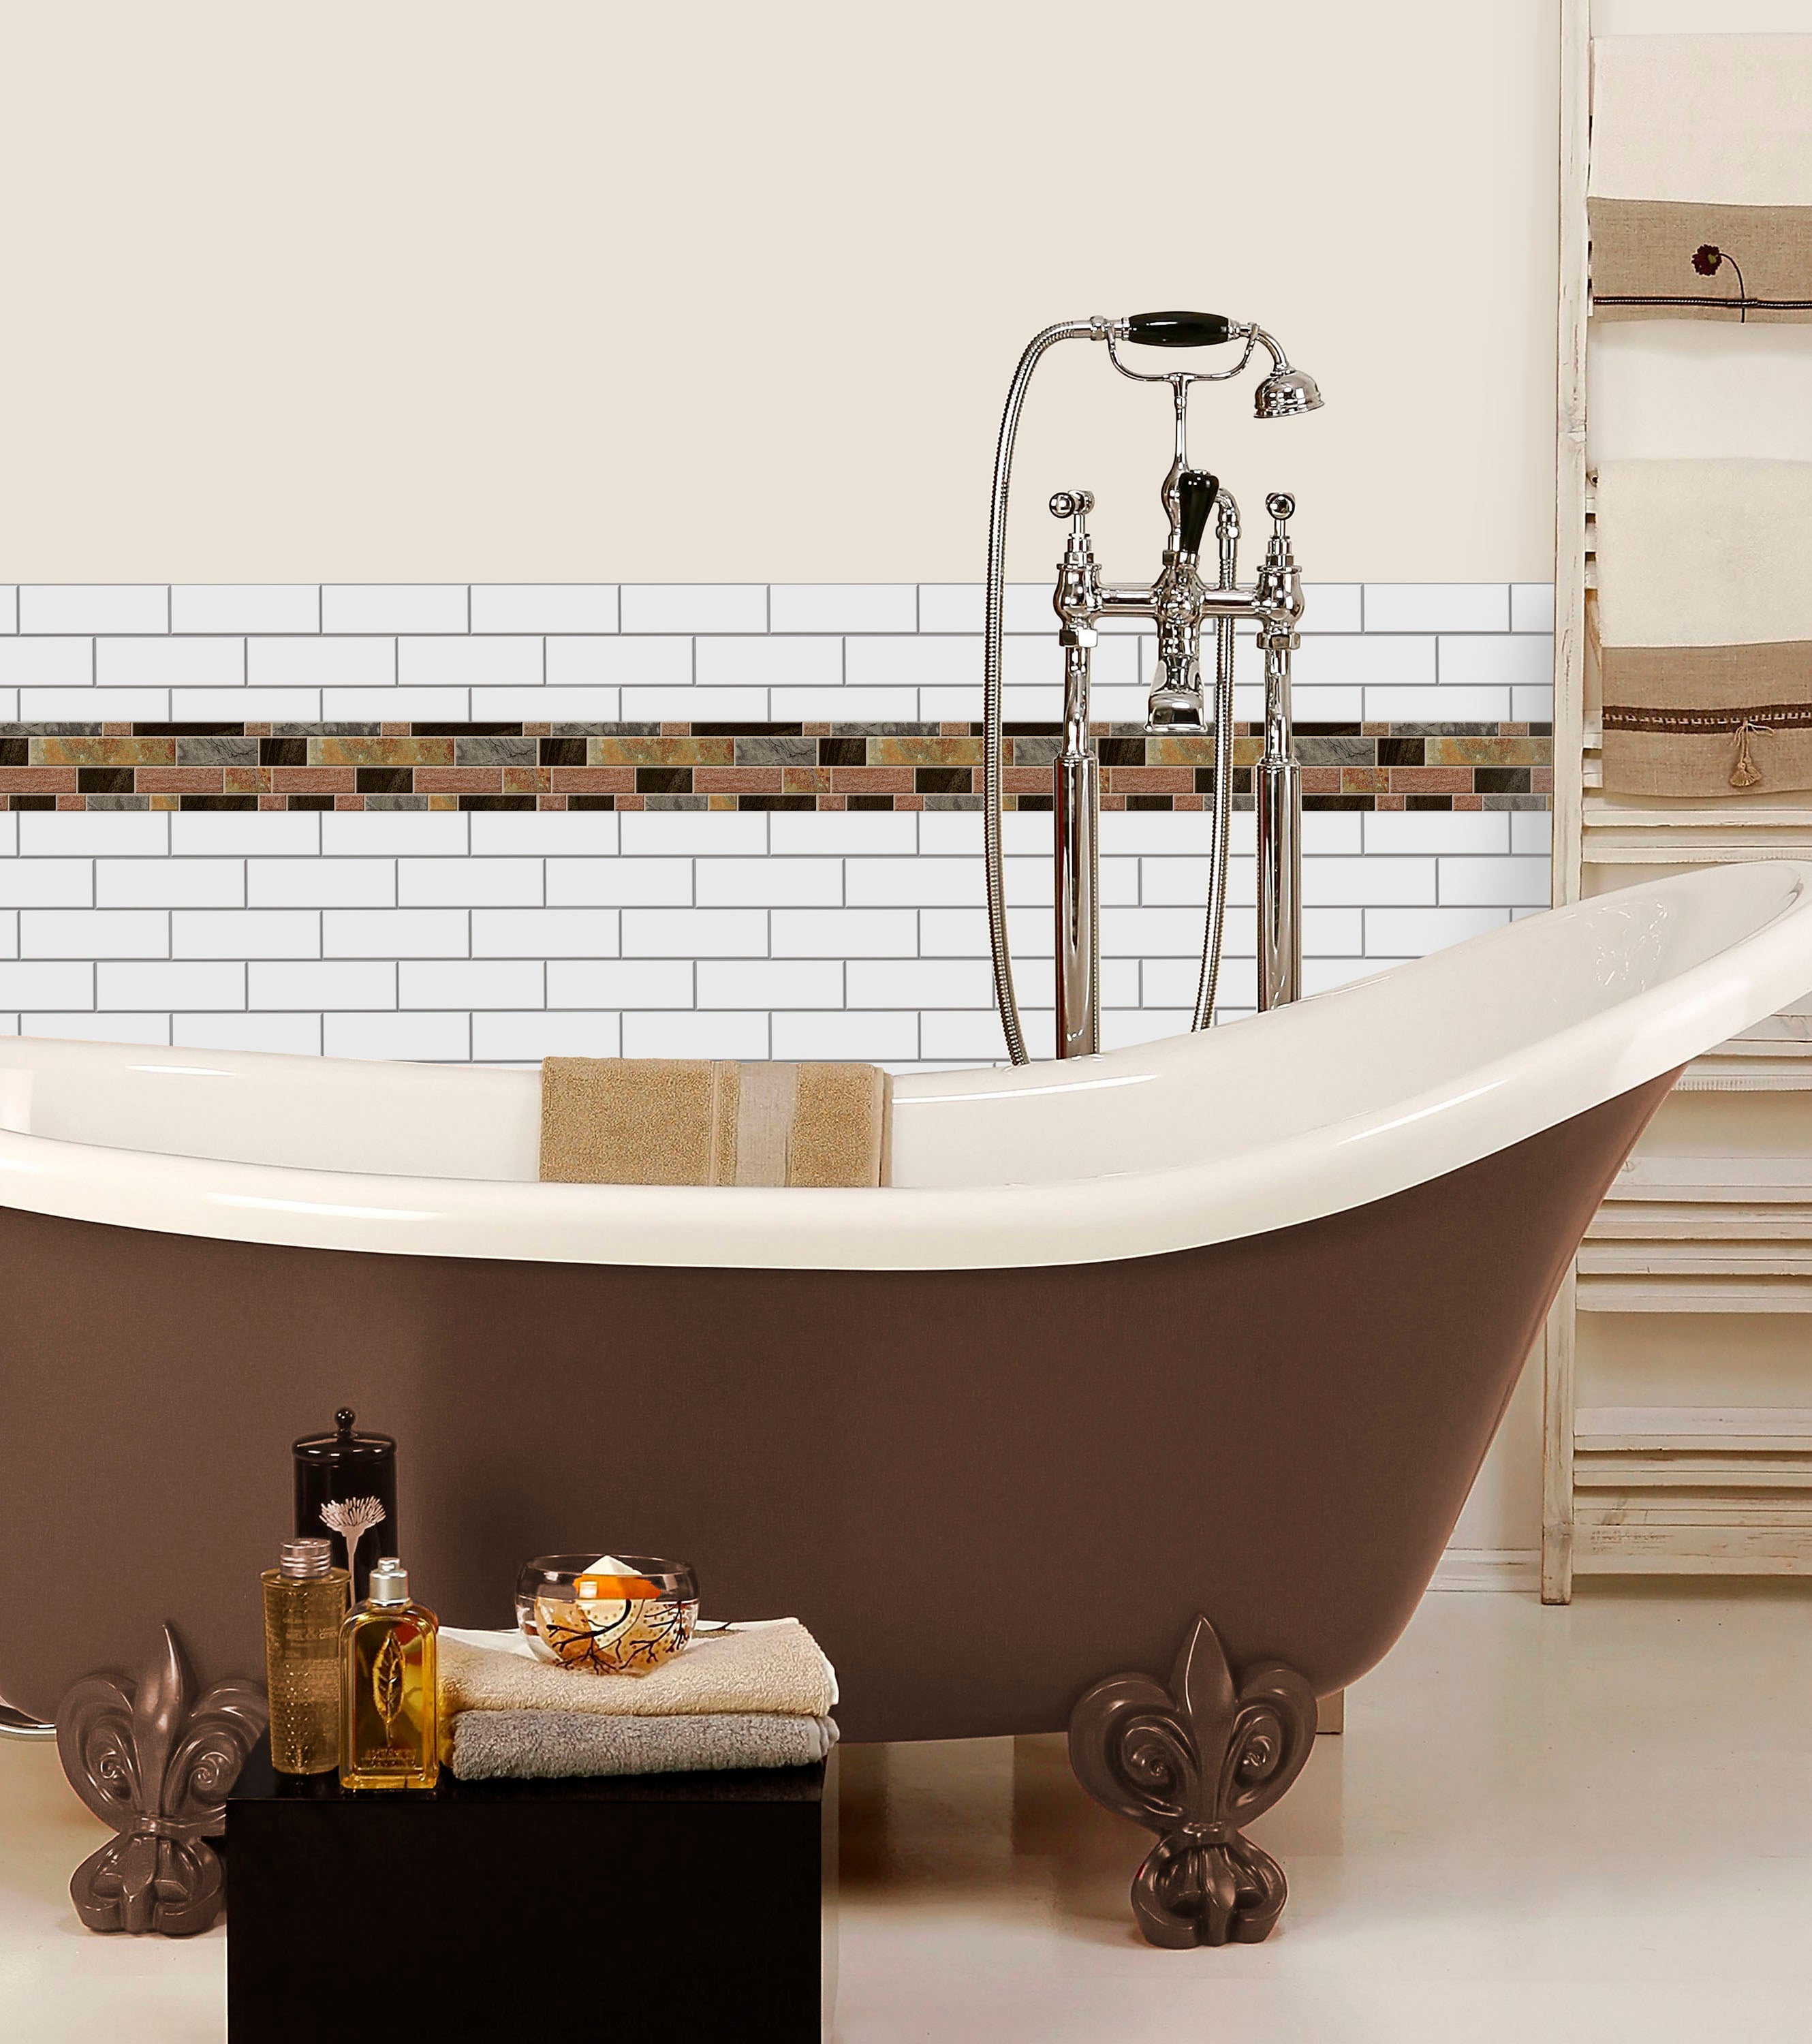 Create A Fresh New Look In A Bathroom With Sticktiles